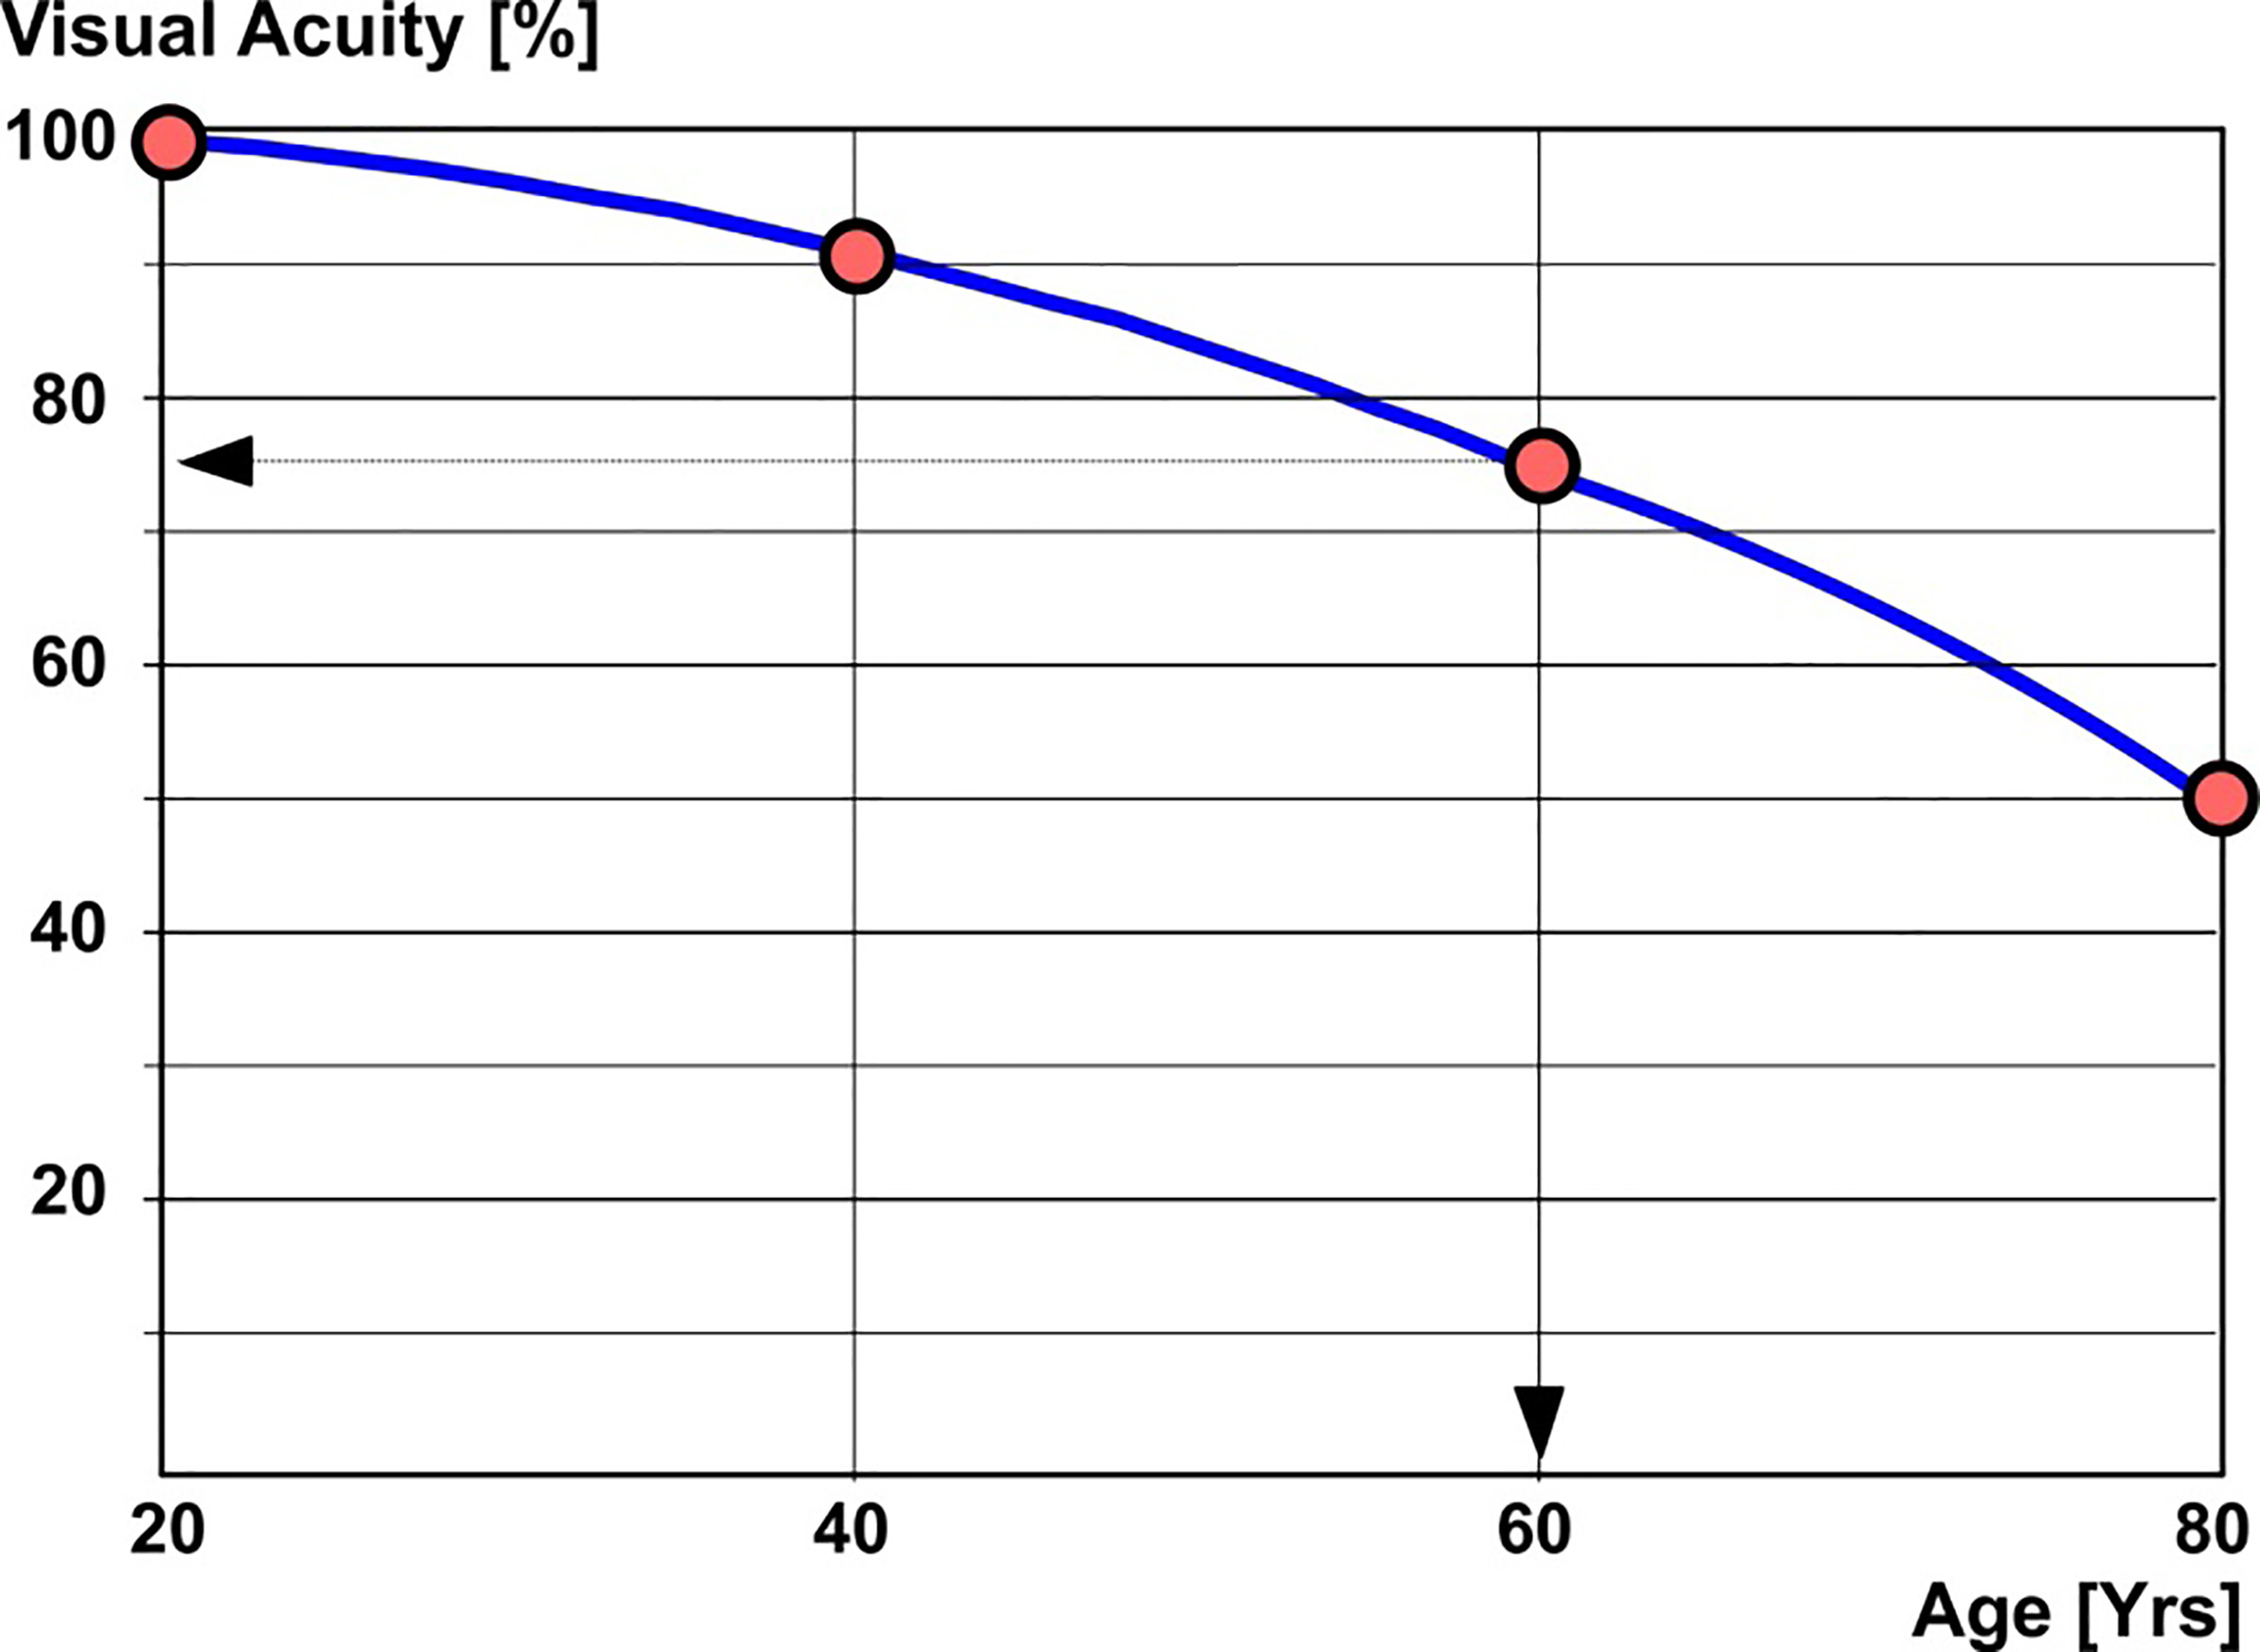 Course of aging of the visual acuity.